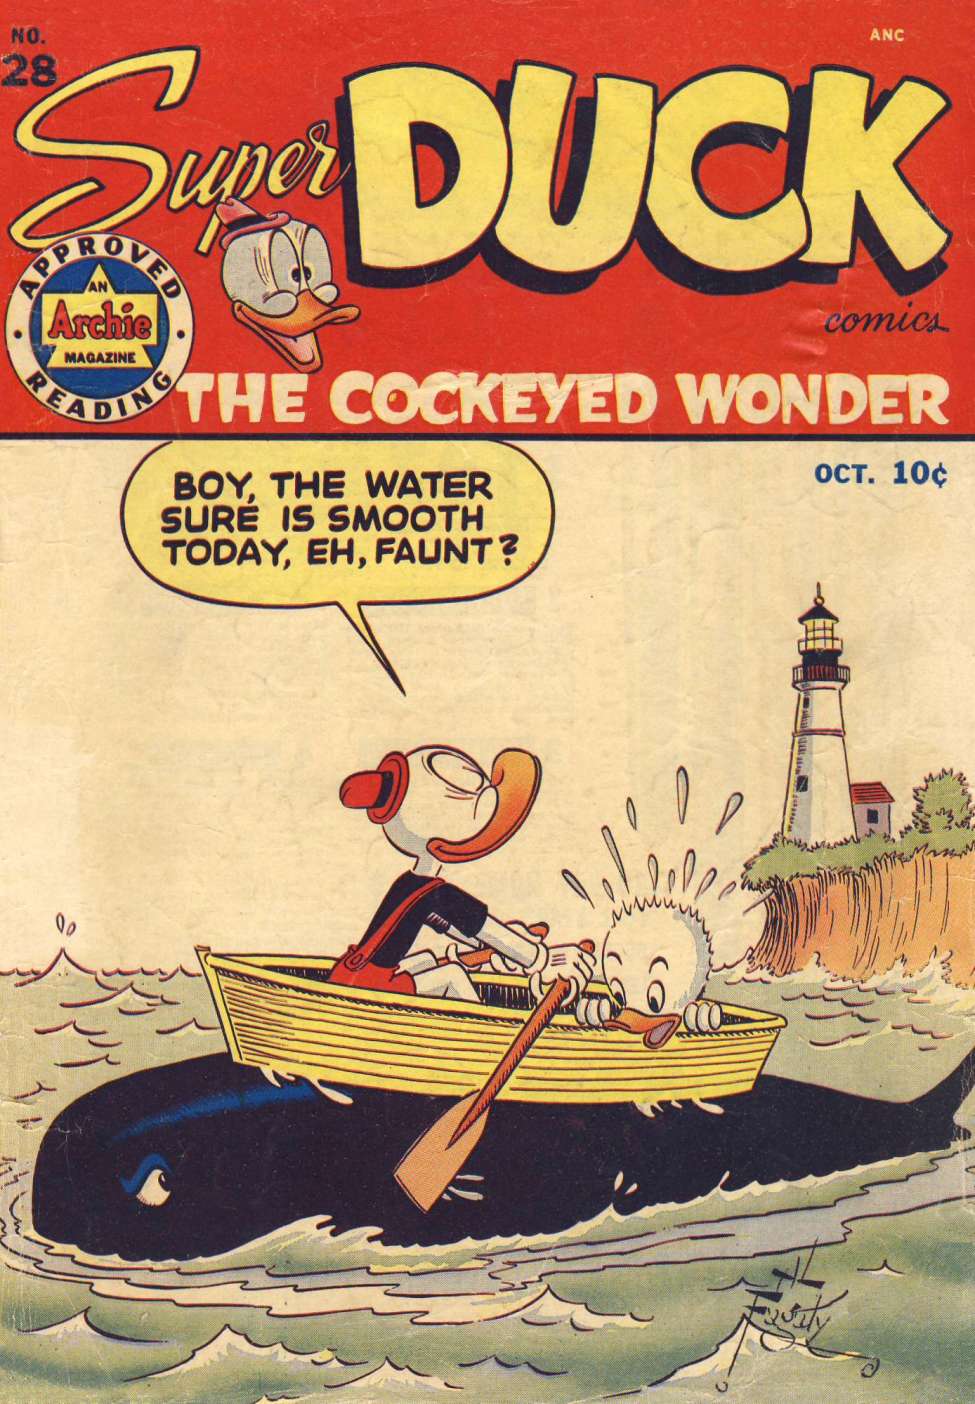 Book Cover For Super Duck 28